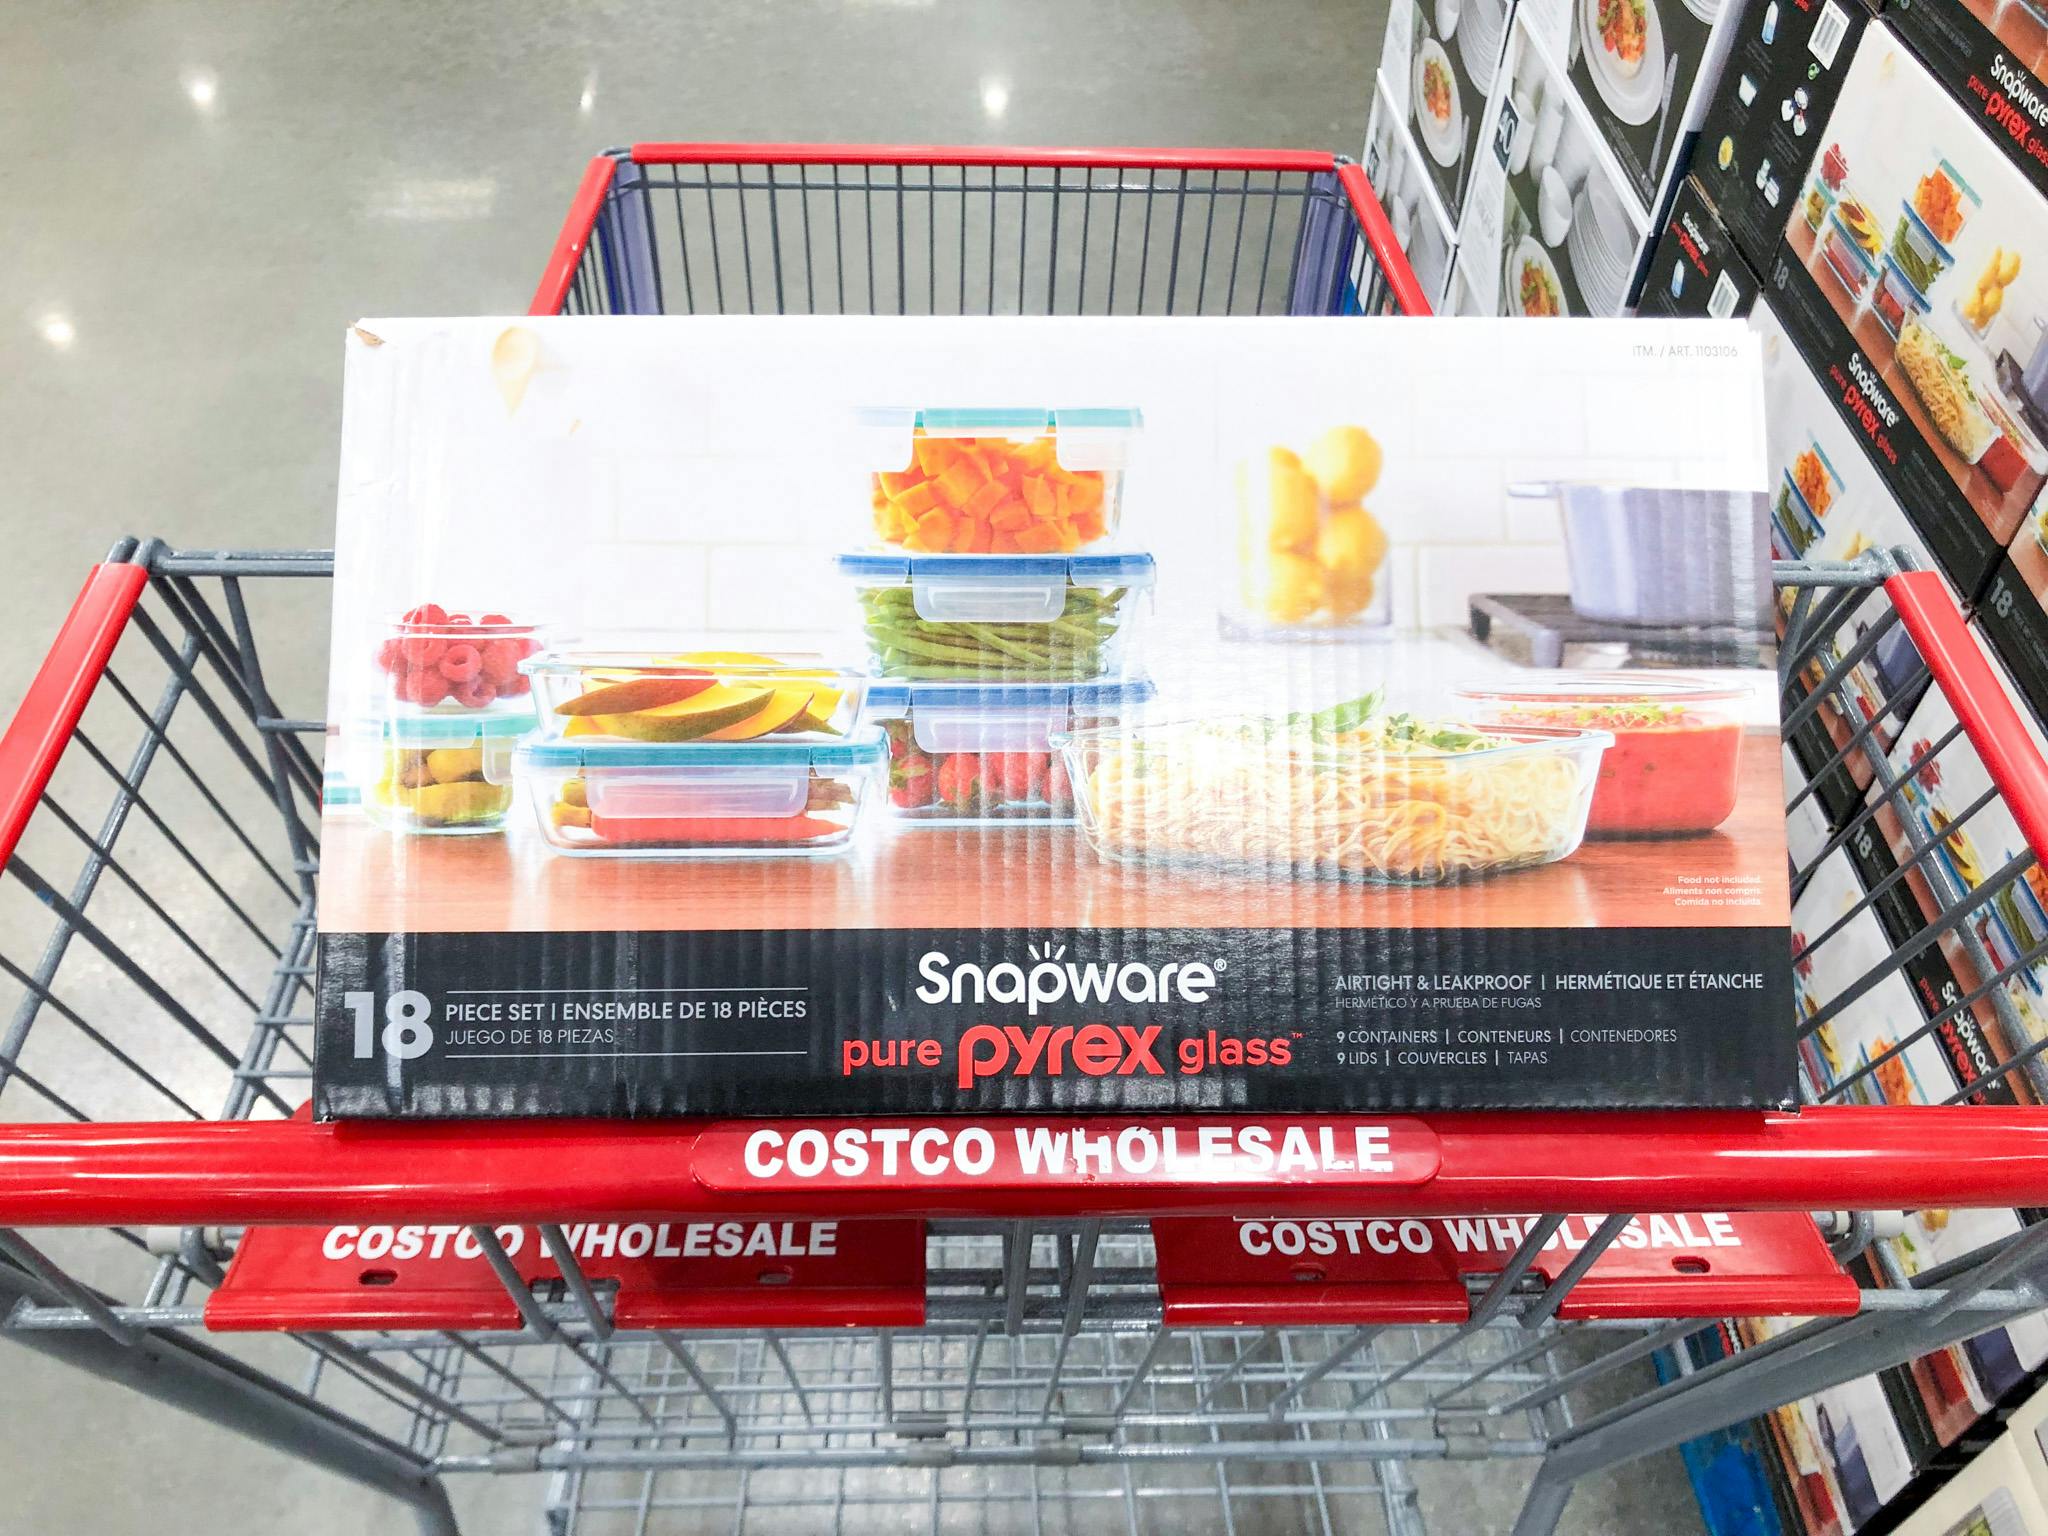 Pyrex Snapware 18-Piece Glass Food Storage Set, Only $20 at Costco - The  Krazy Coupon Lady